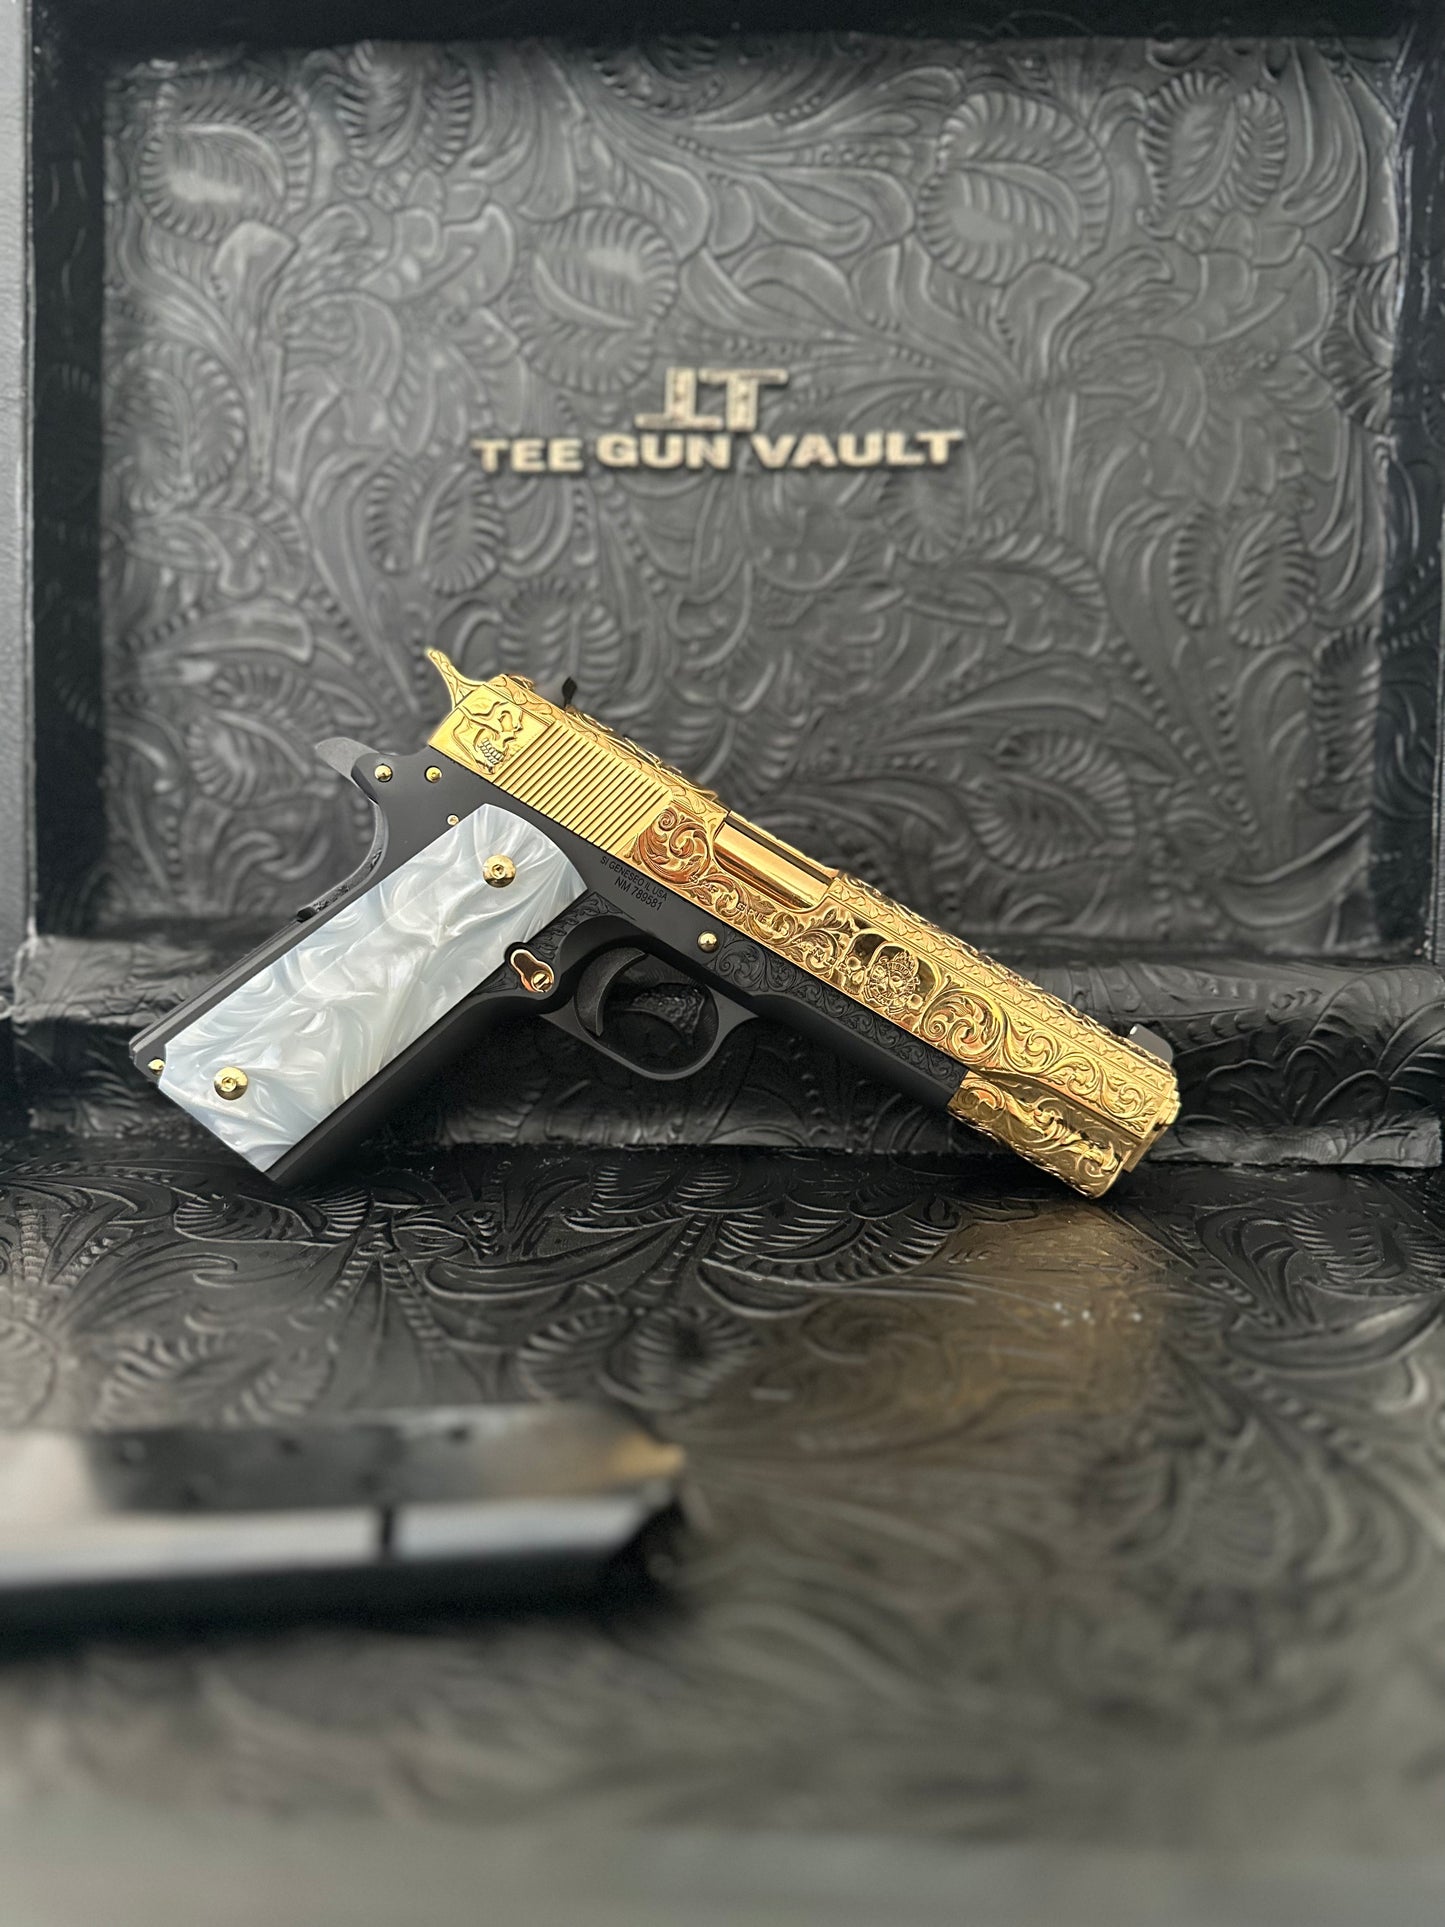 SPRINGFIELD ARMORY 1911 MIL SPEC 45ACP 24k GOLD PLATED AND FULLY ENGRAVED